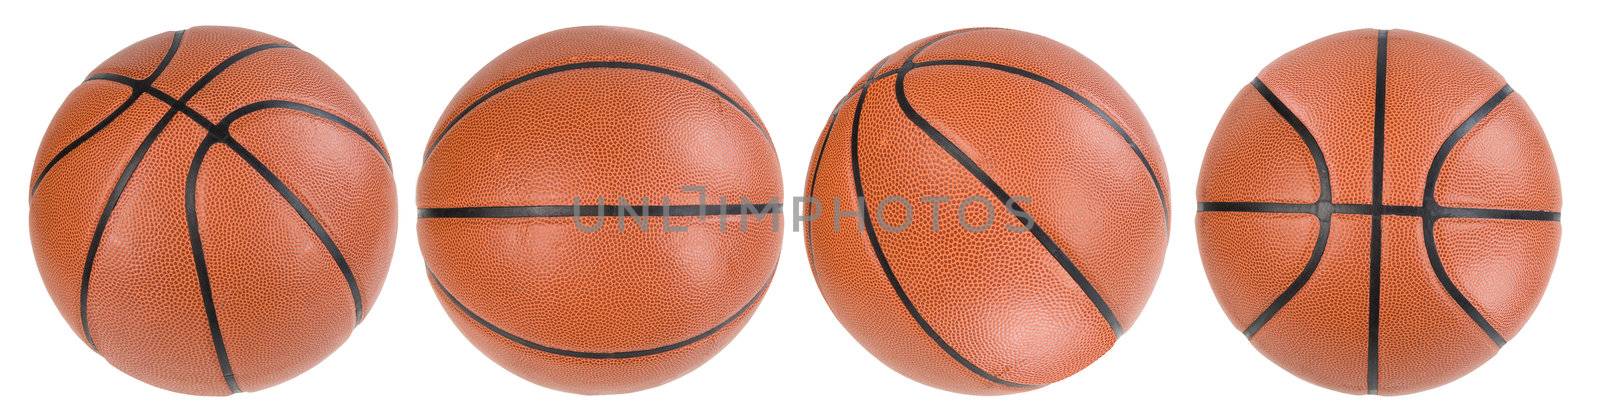 Four basketball ball isolated. Clipping paths